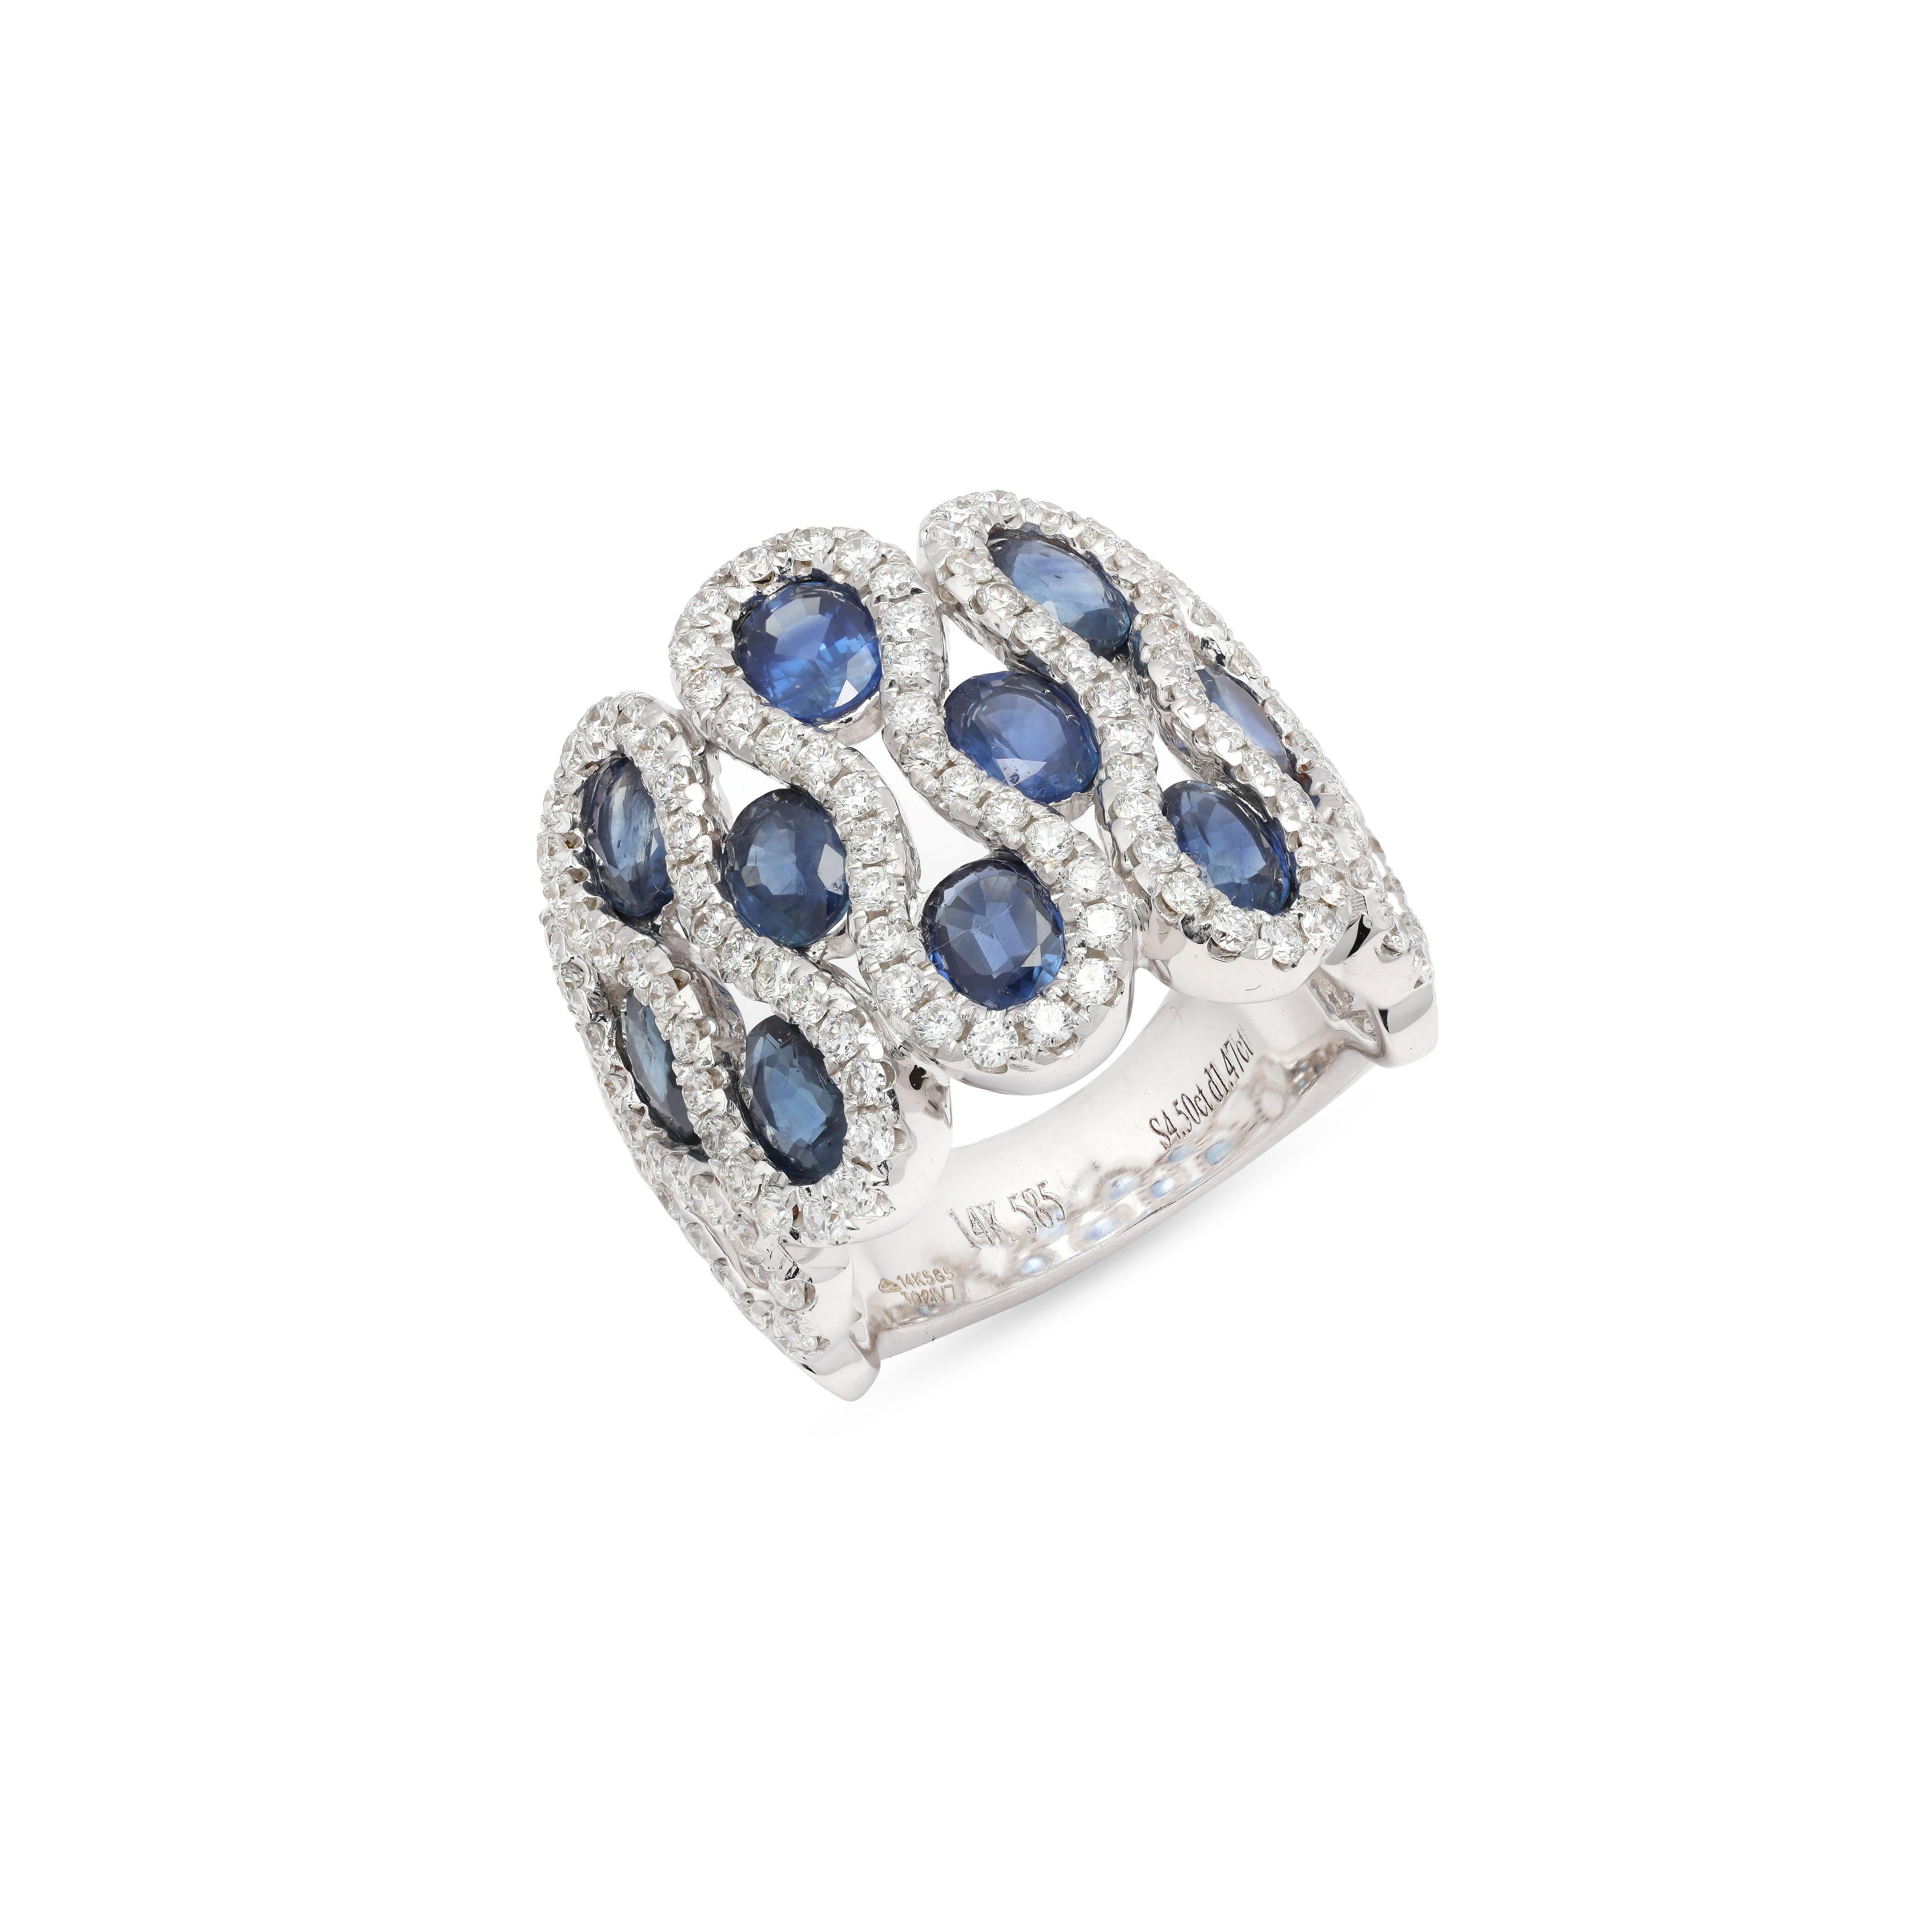 For Sale:  Blue Sapphire Cluster Diamond Ring in 14K White Gold  4